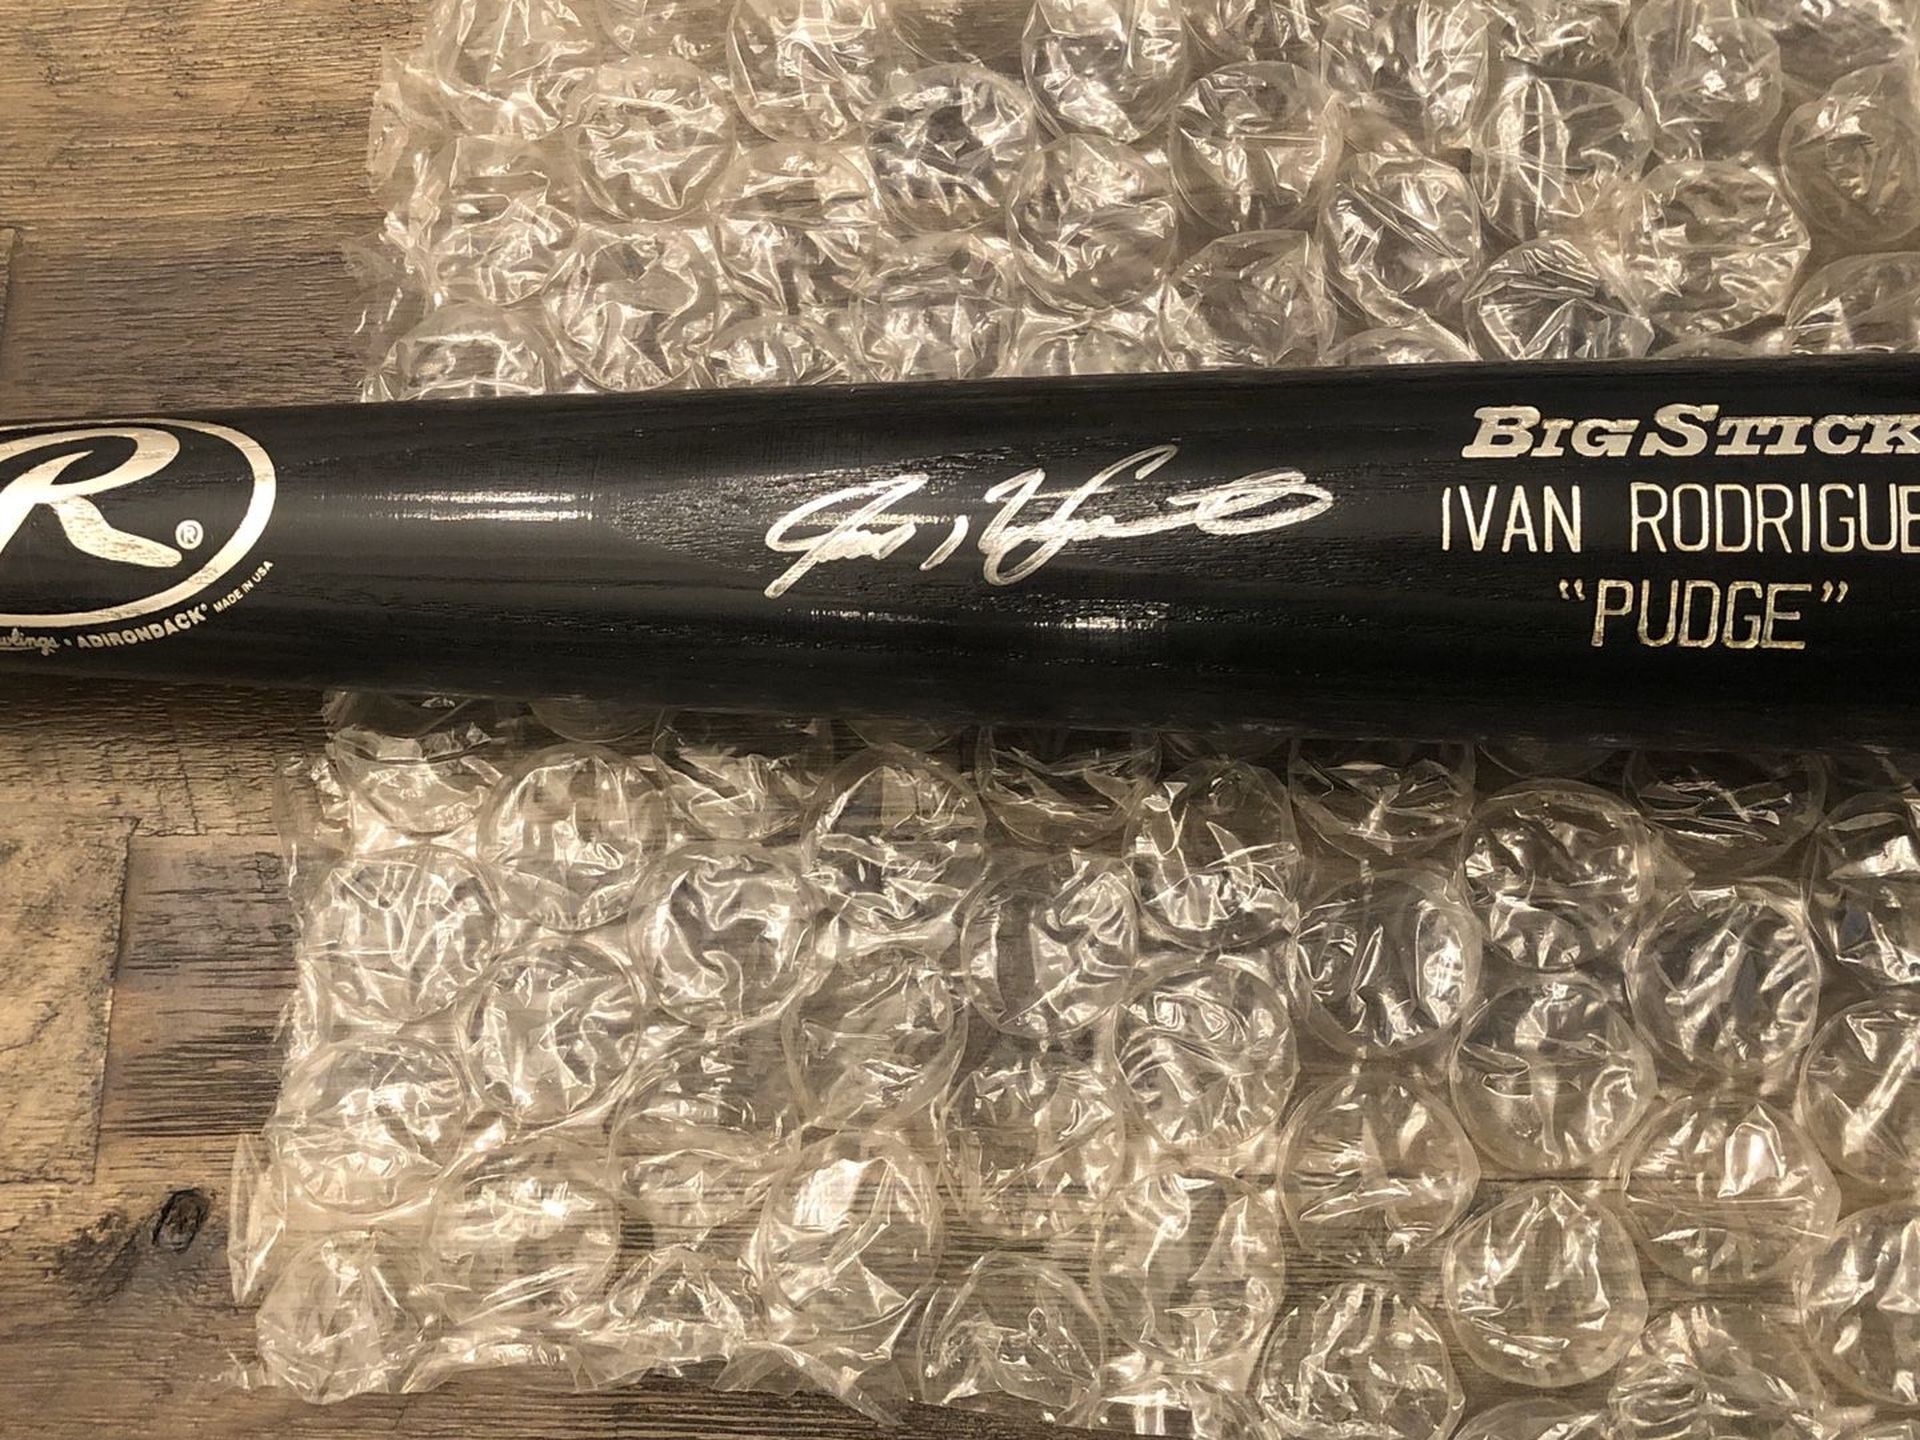 Ivan “Pudge” Rodriguez Signed Bat Rawlings Big Stick Engraved in Silver with IVAN RODRIGUEZ “PUDGE” with Hologram Sticker from Sports Integrity